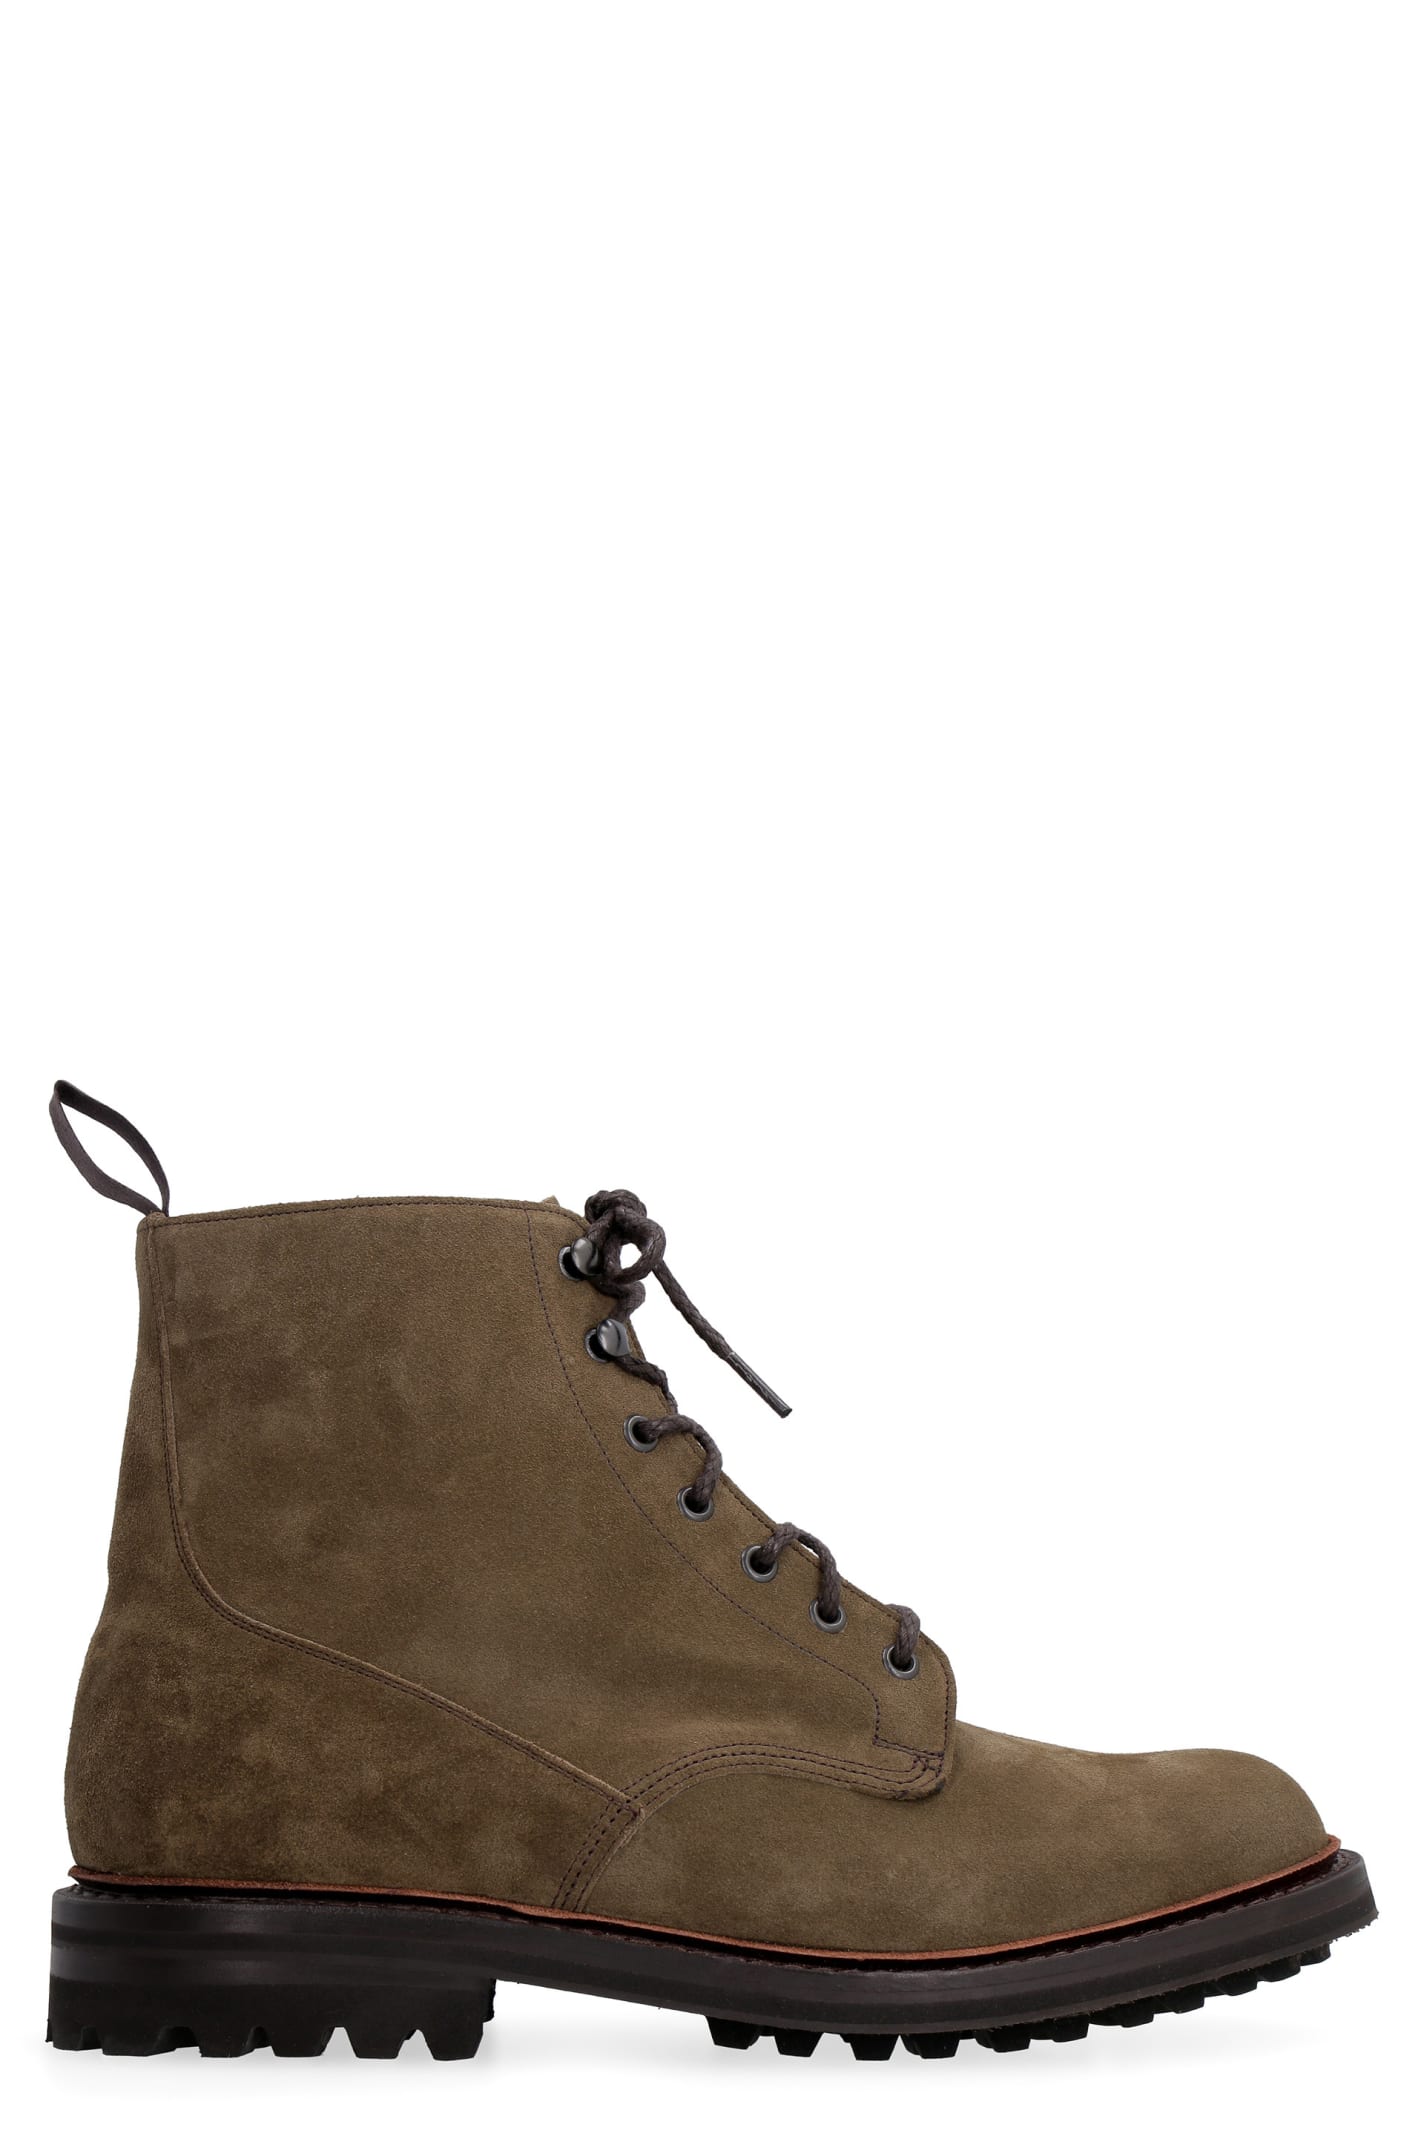 Churchs Mc Duff Lw Suede Ankle Boots